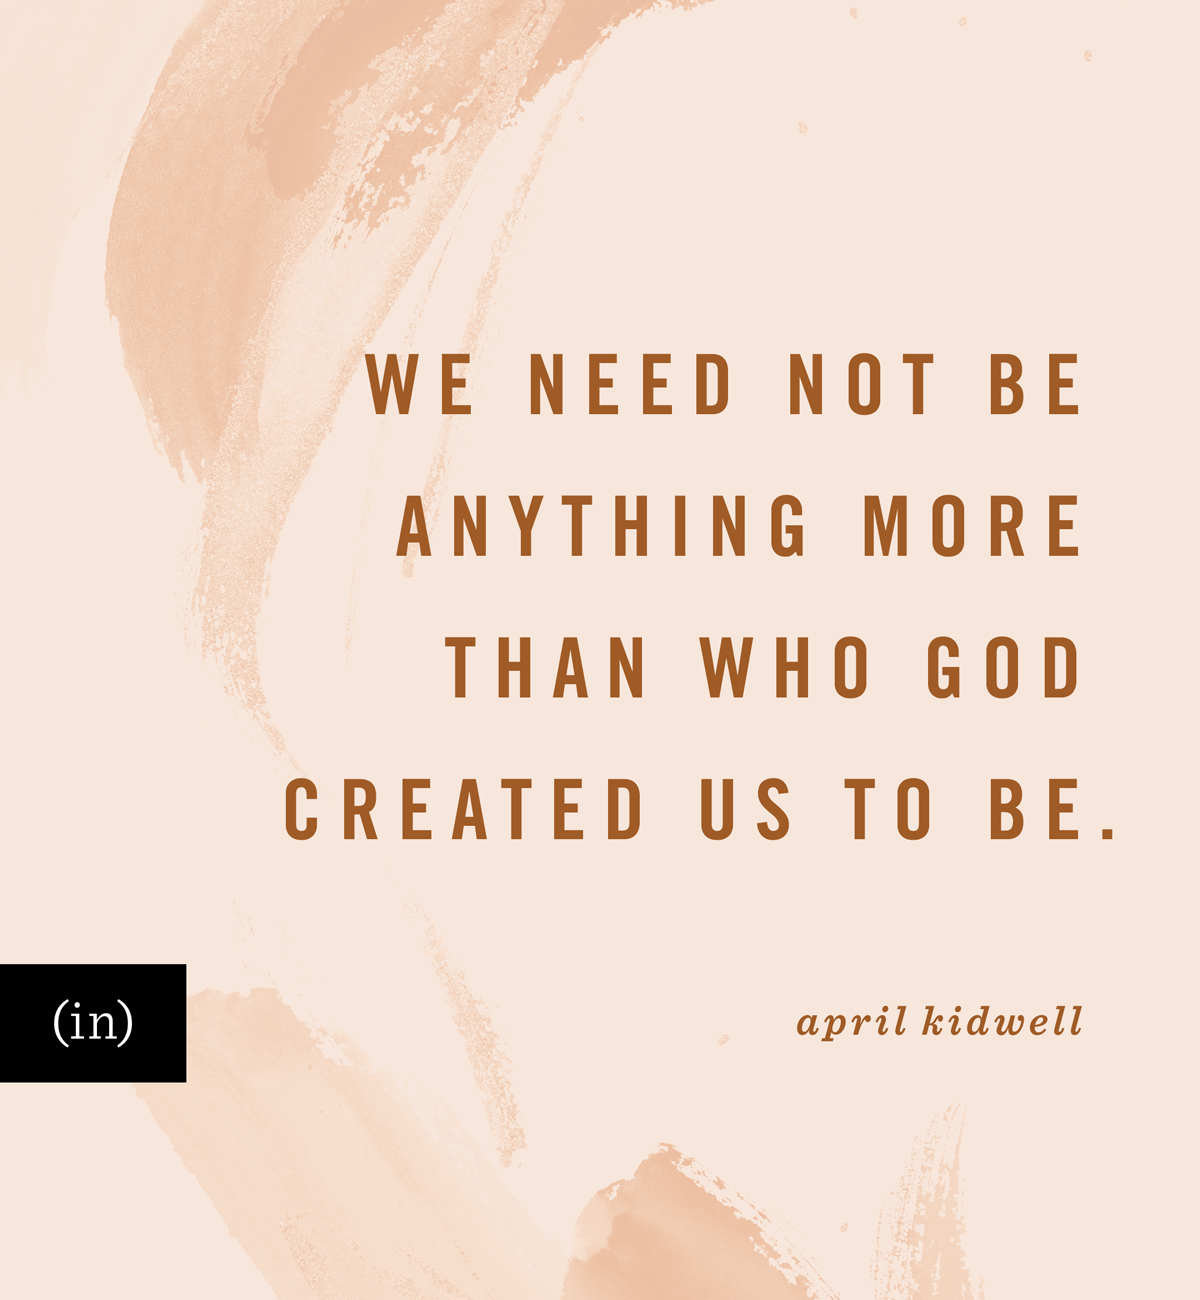 We need not be anything more than who God created us to be. -April Kidwell